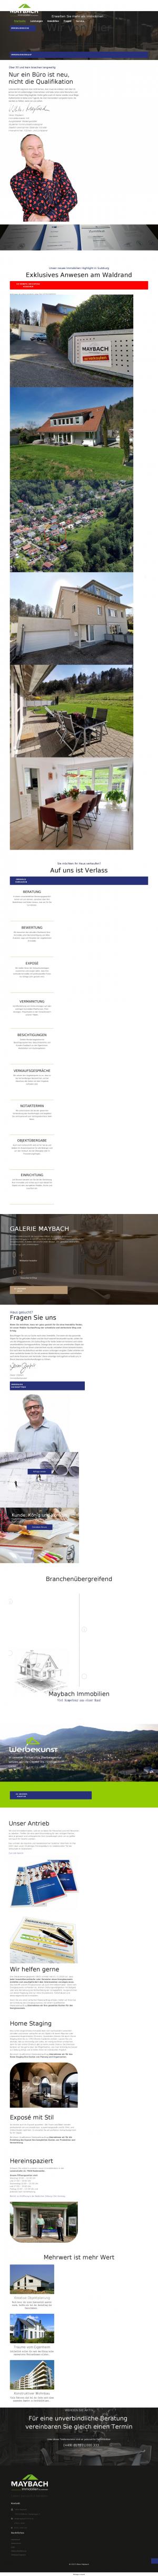 www.maybach-immobilien.com